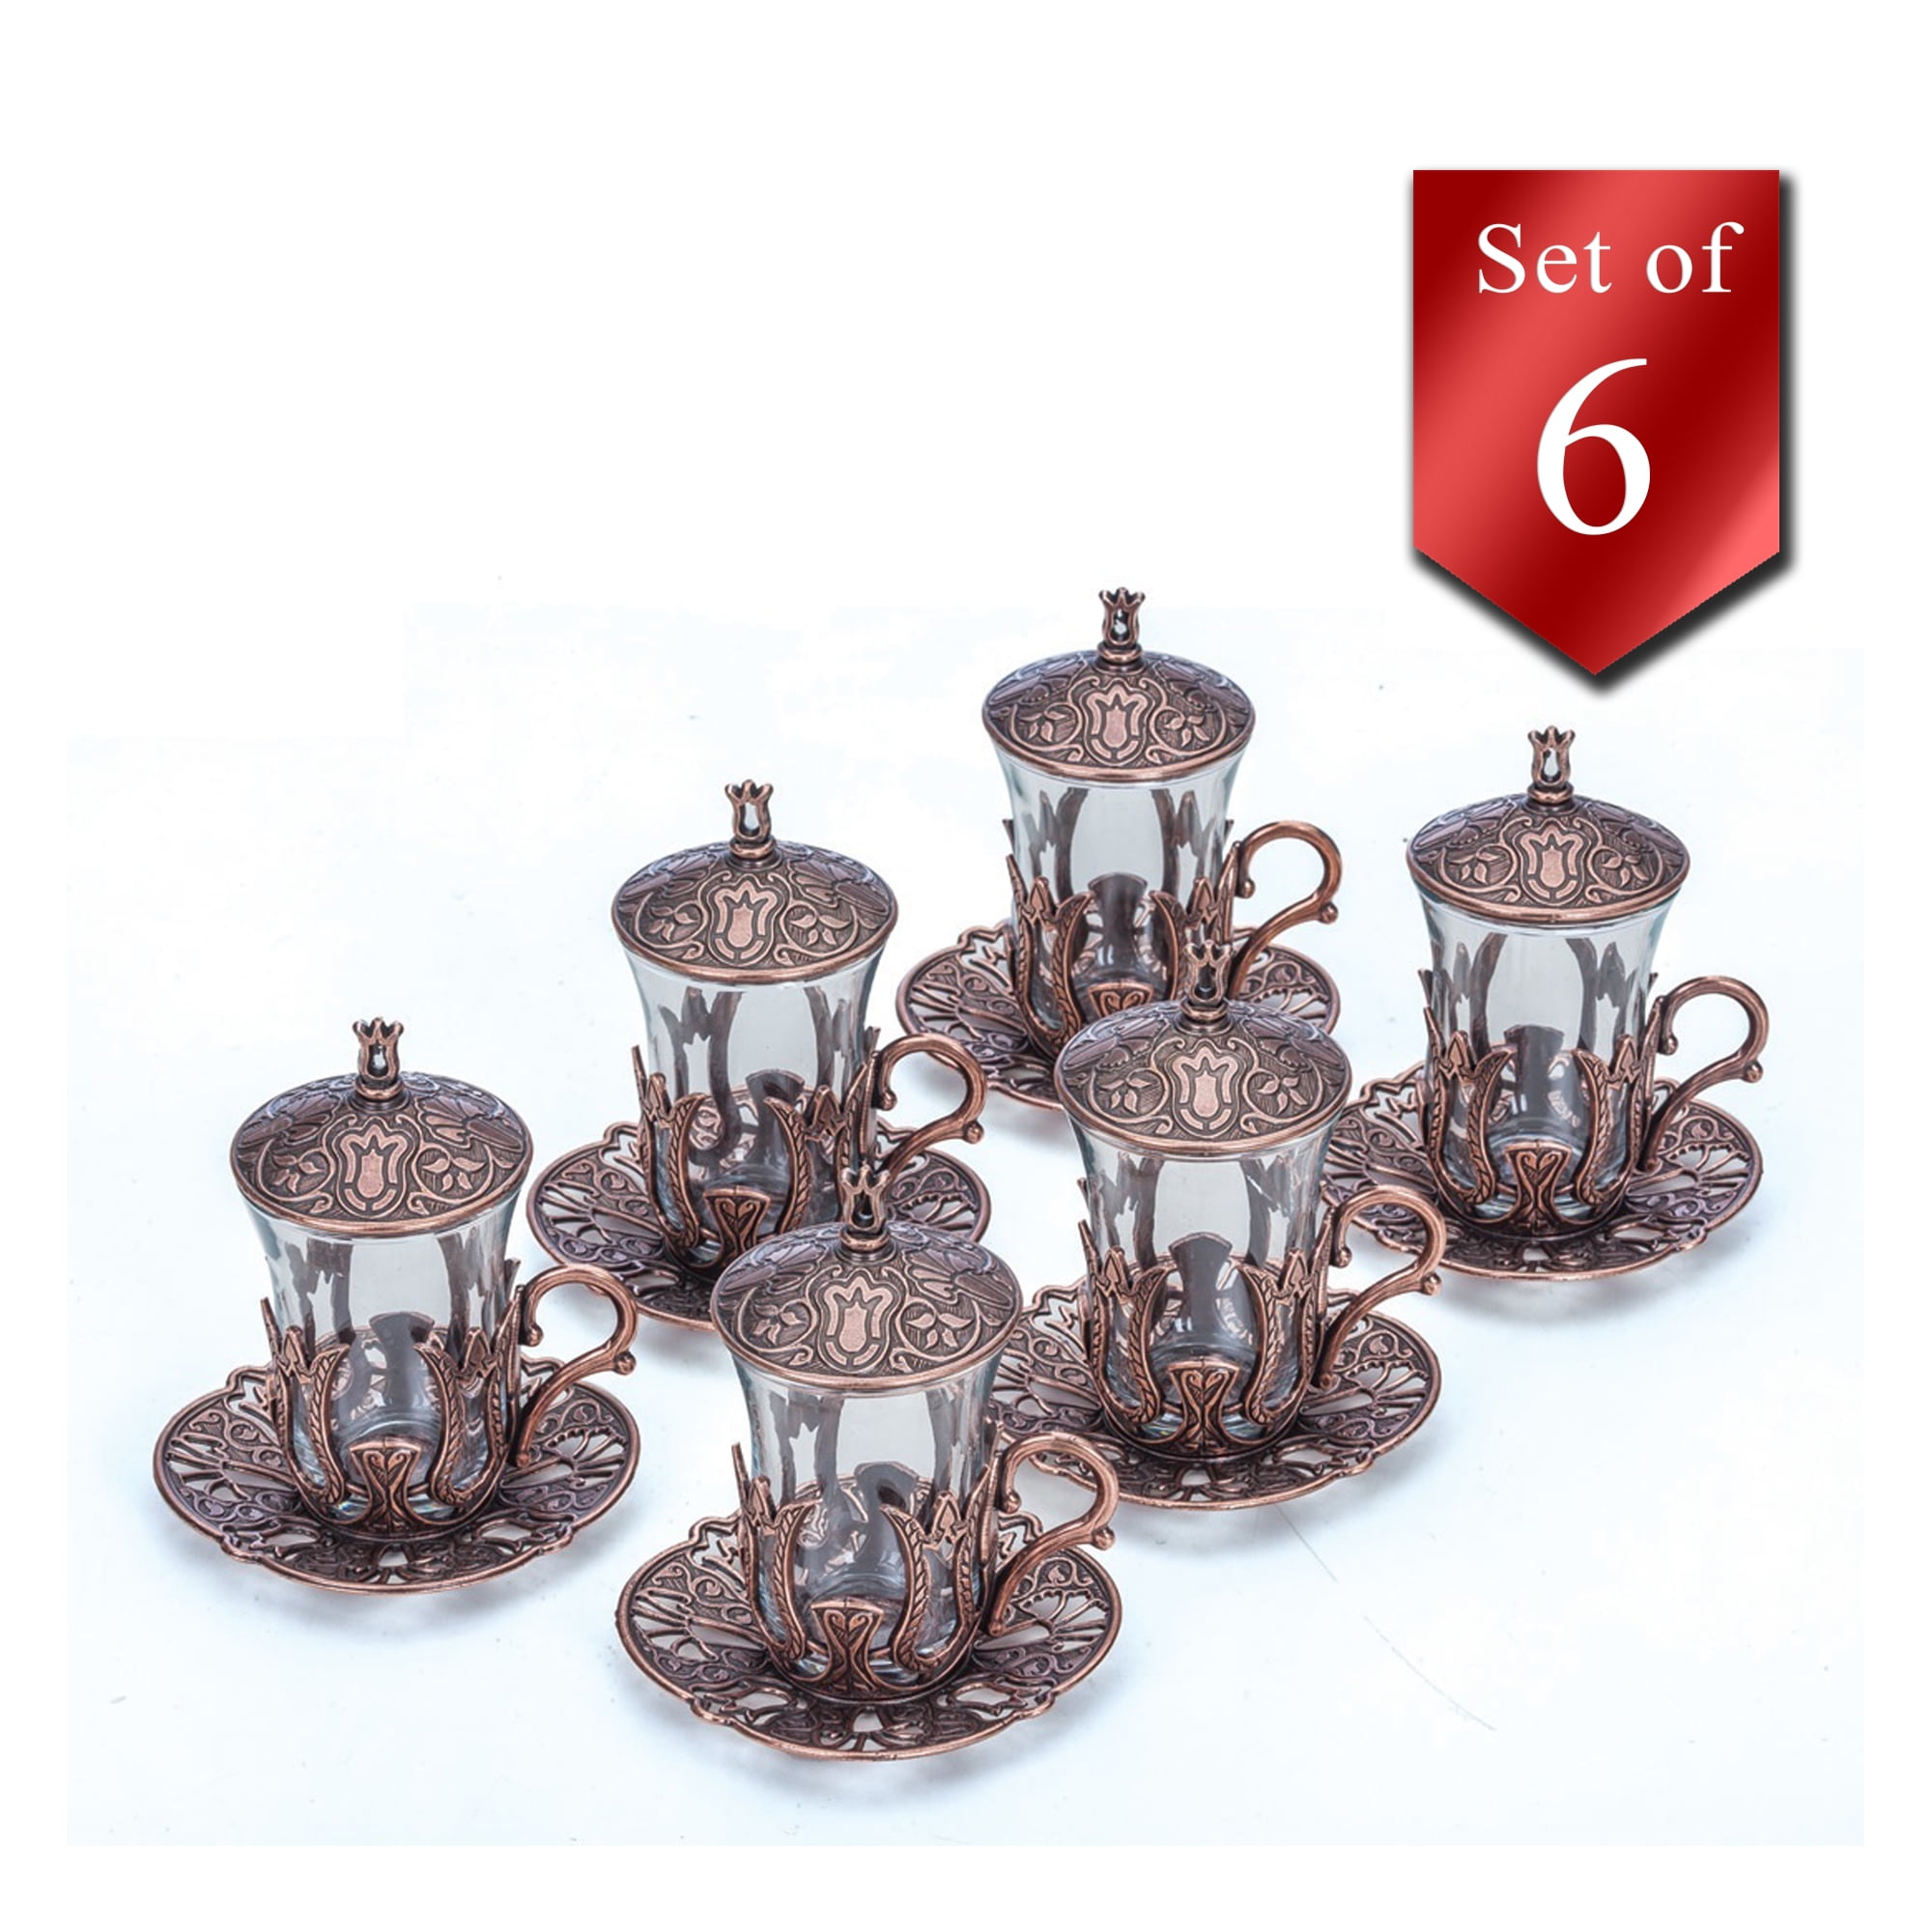 Details about   Brass Handmade Unique shape Tea Coffee Filter /Tea Strainer Collectible 